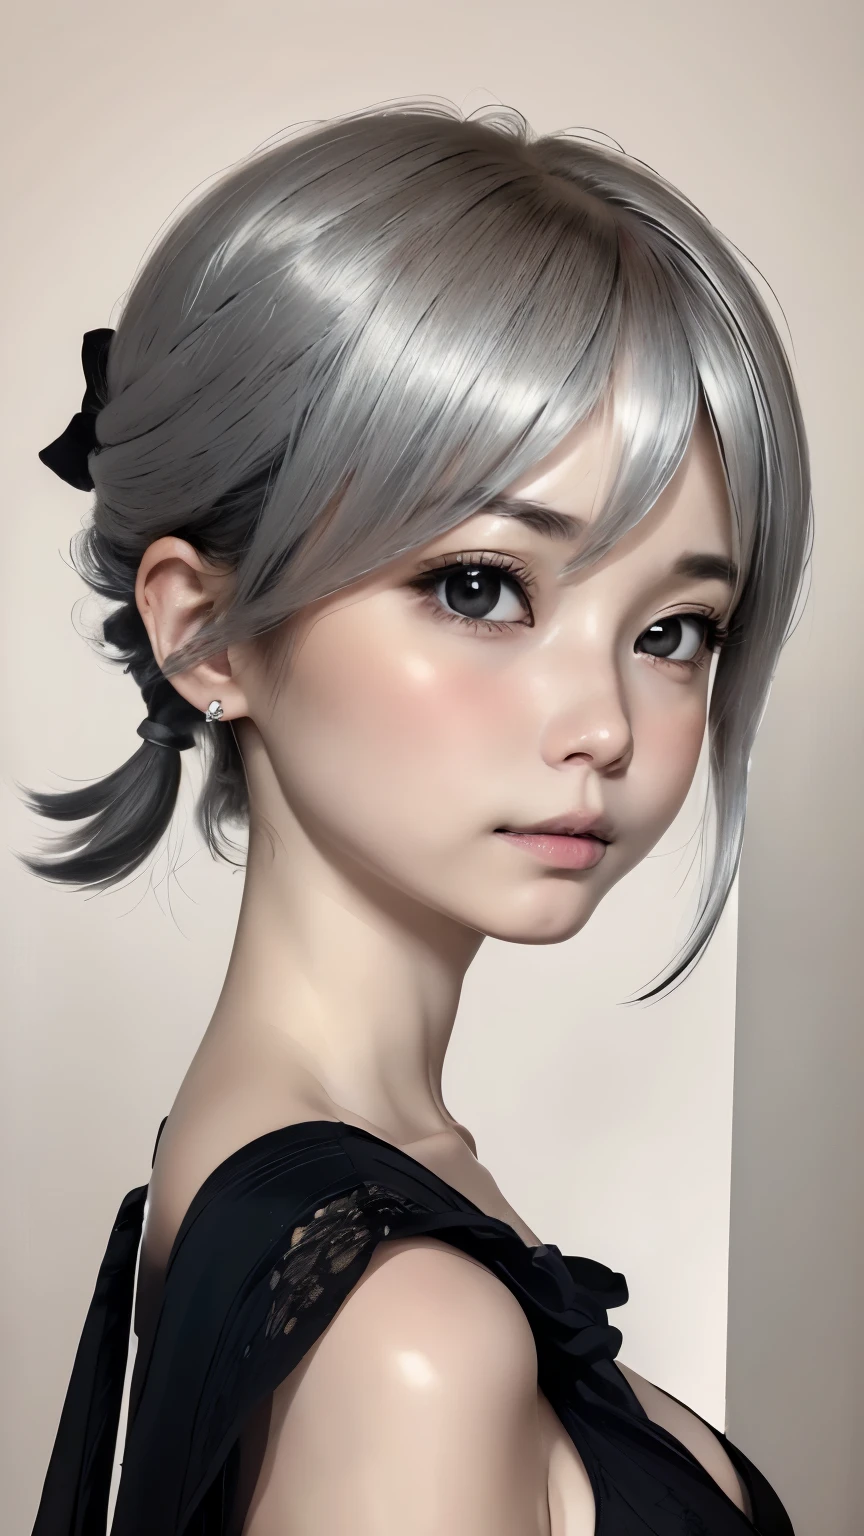 ((wallpaper 8k)), ((surreal)), ((Quality with attention to detail:1.2)), 1 girl, １４talent、kind eyes、plump lips、Ash gray hair、An ennui look、small breasts、small breasts、black elegant dress,Black capelet, look up, Widespread poverty, short cut hair、short hair twintails、Ash gray hair:1.5、white skin、